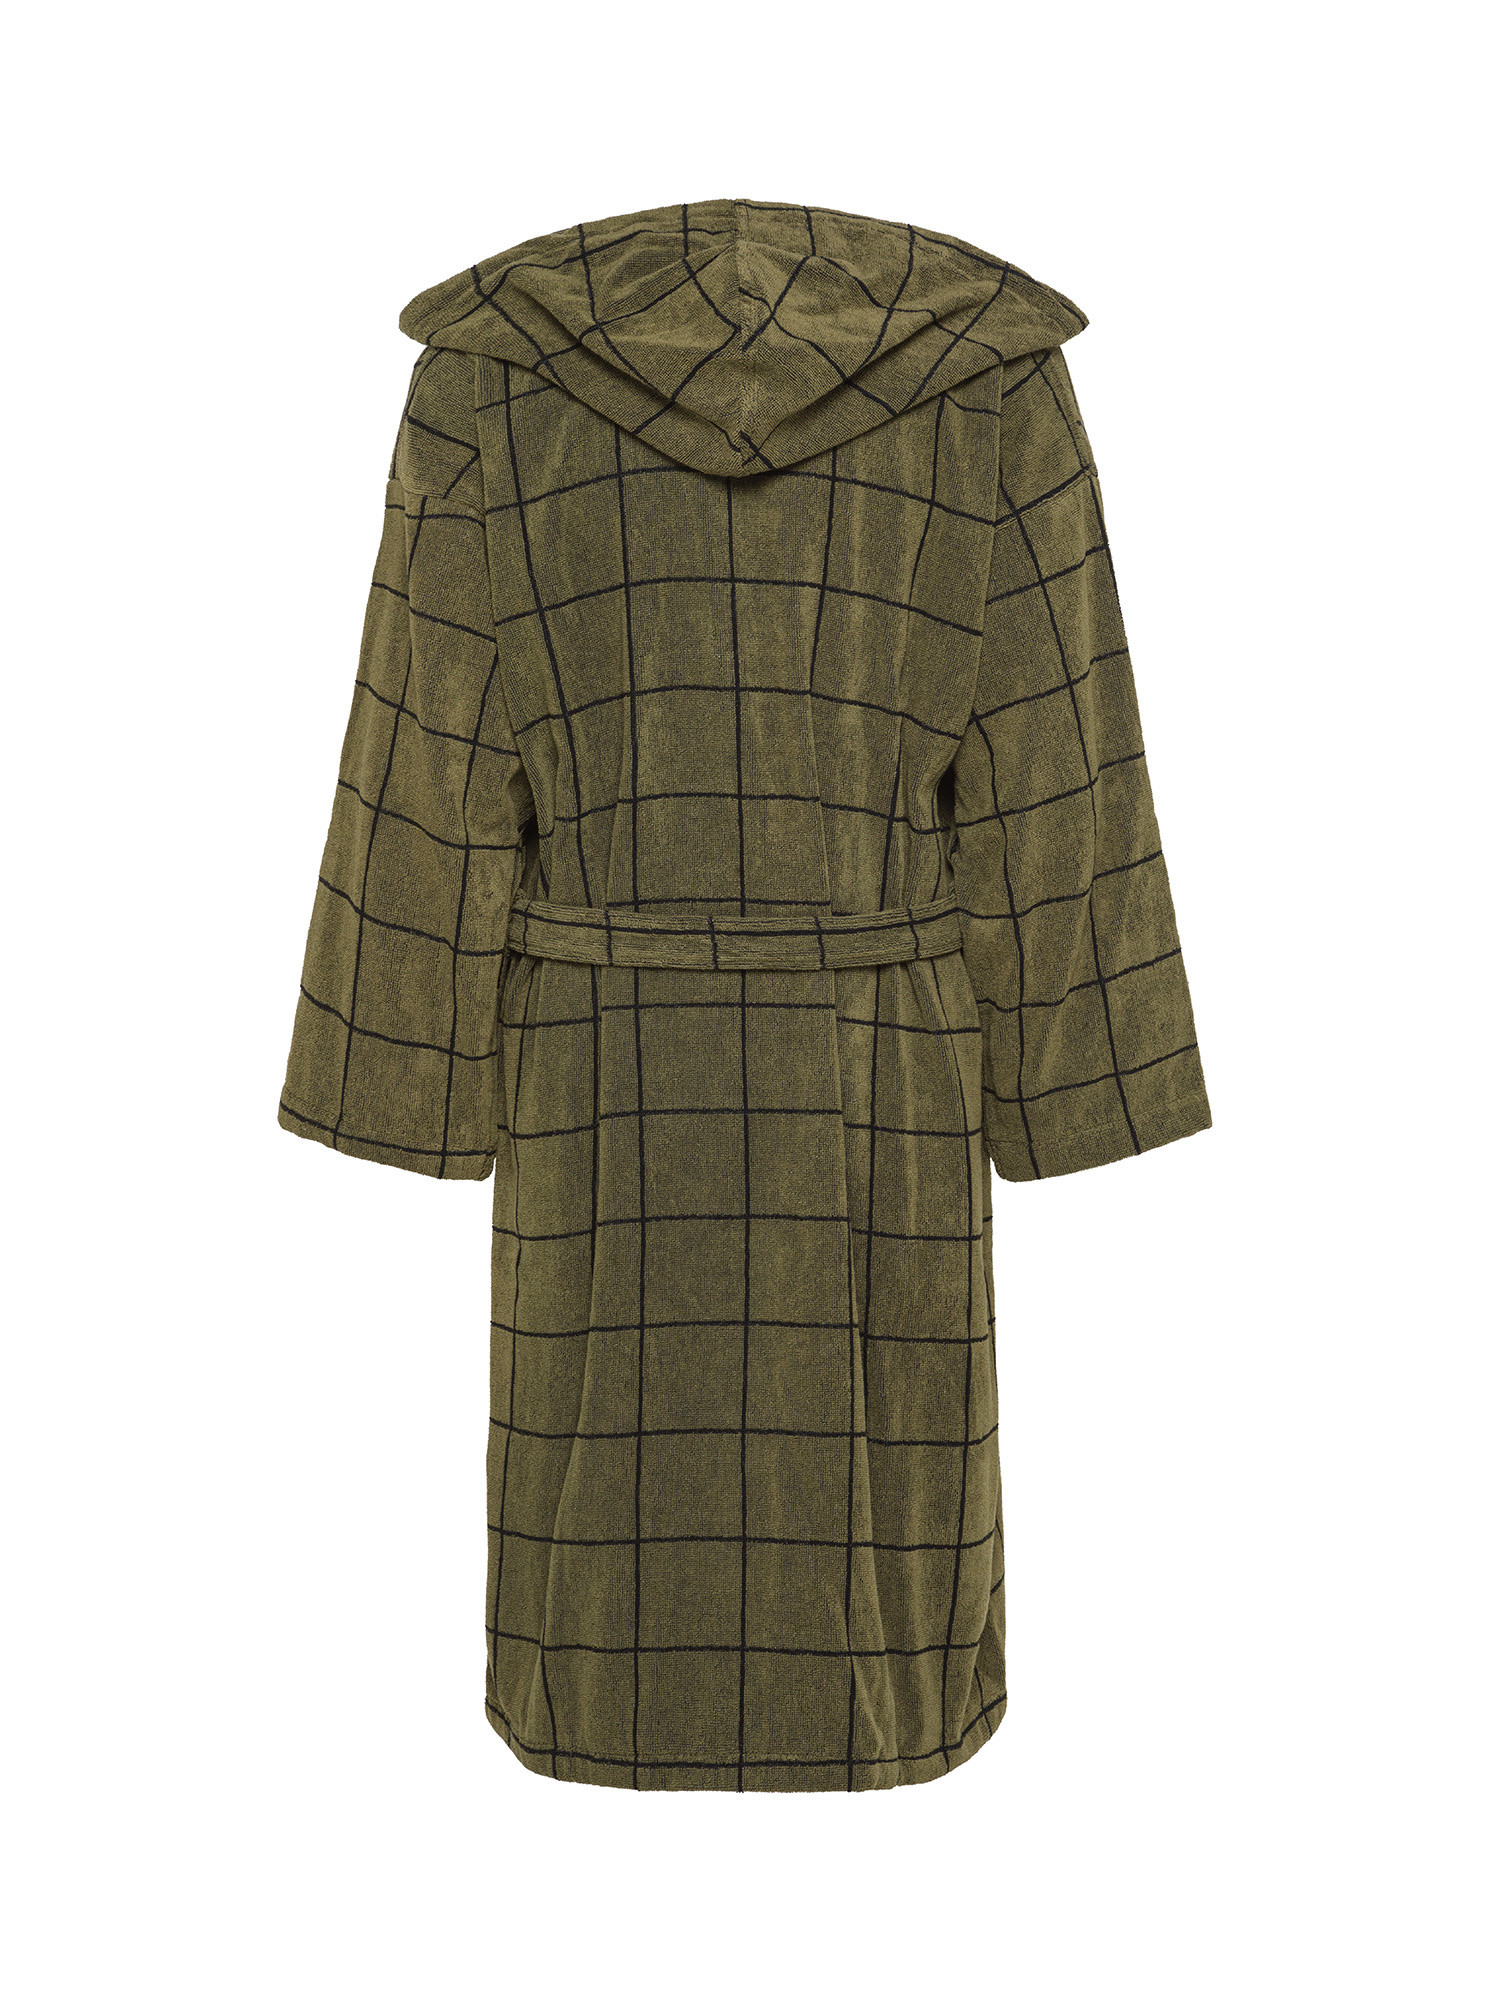 Bathrobe with hood in checked jacquard pure cotton terry, Green, large image number 1